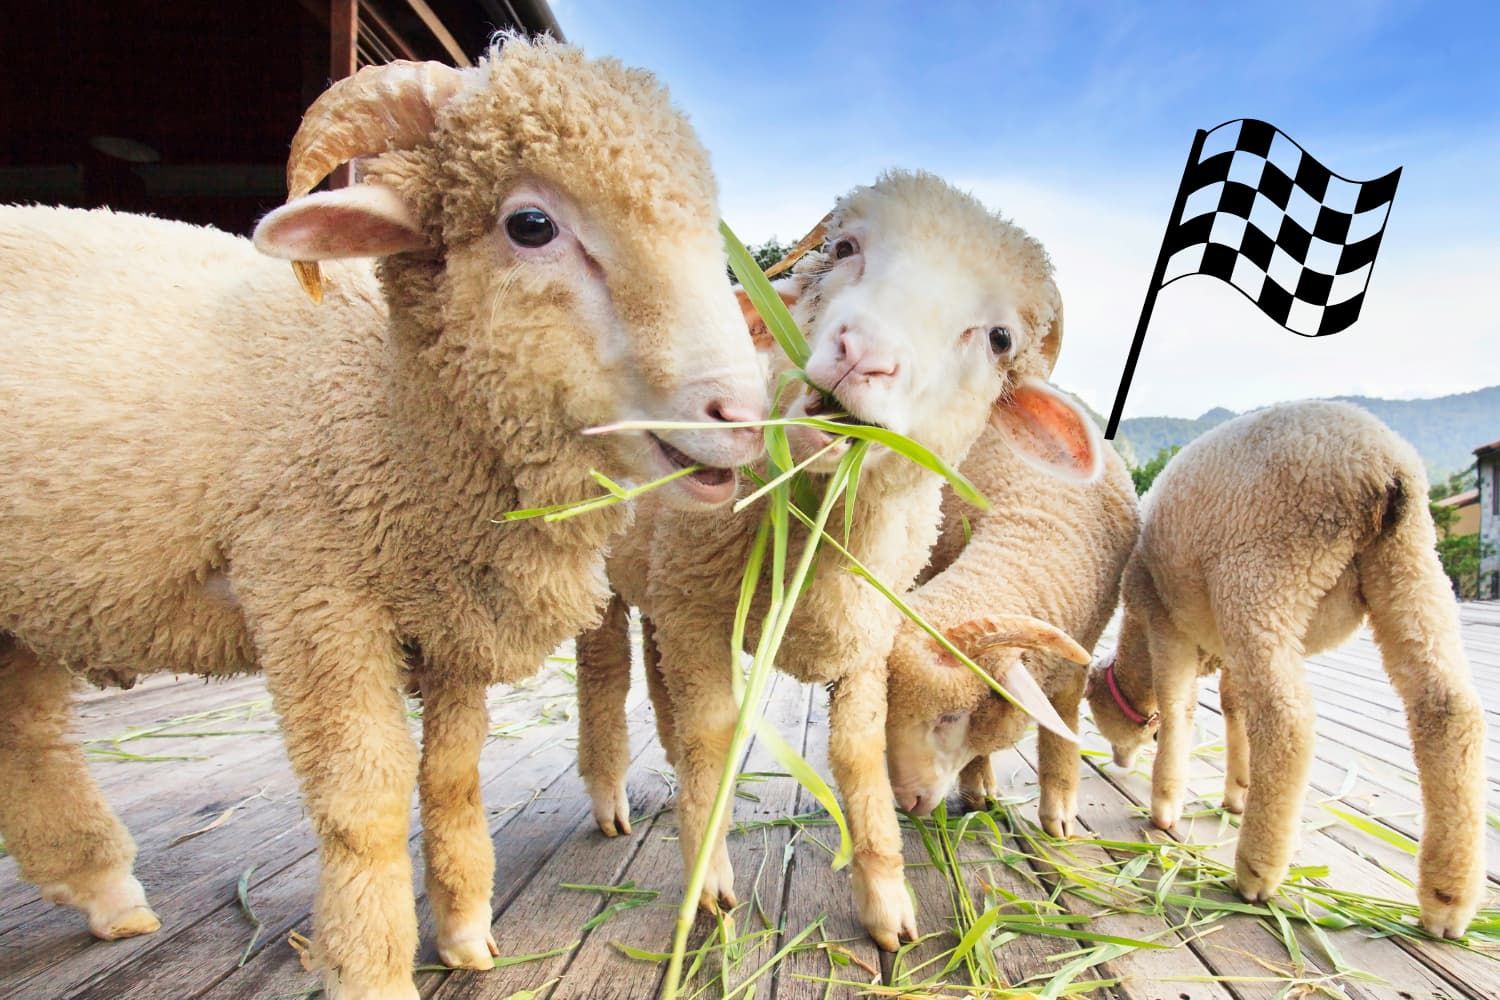 Game%20-%20OT%20Psalm%2023%20-%20The%20feed%20the%20sheep%20relay%20race-6bb58723 Fear